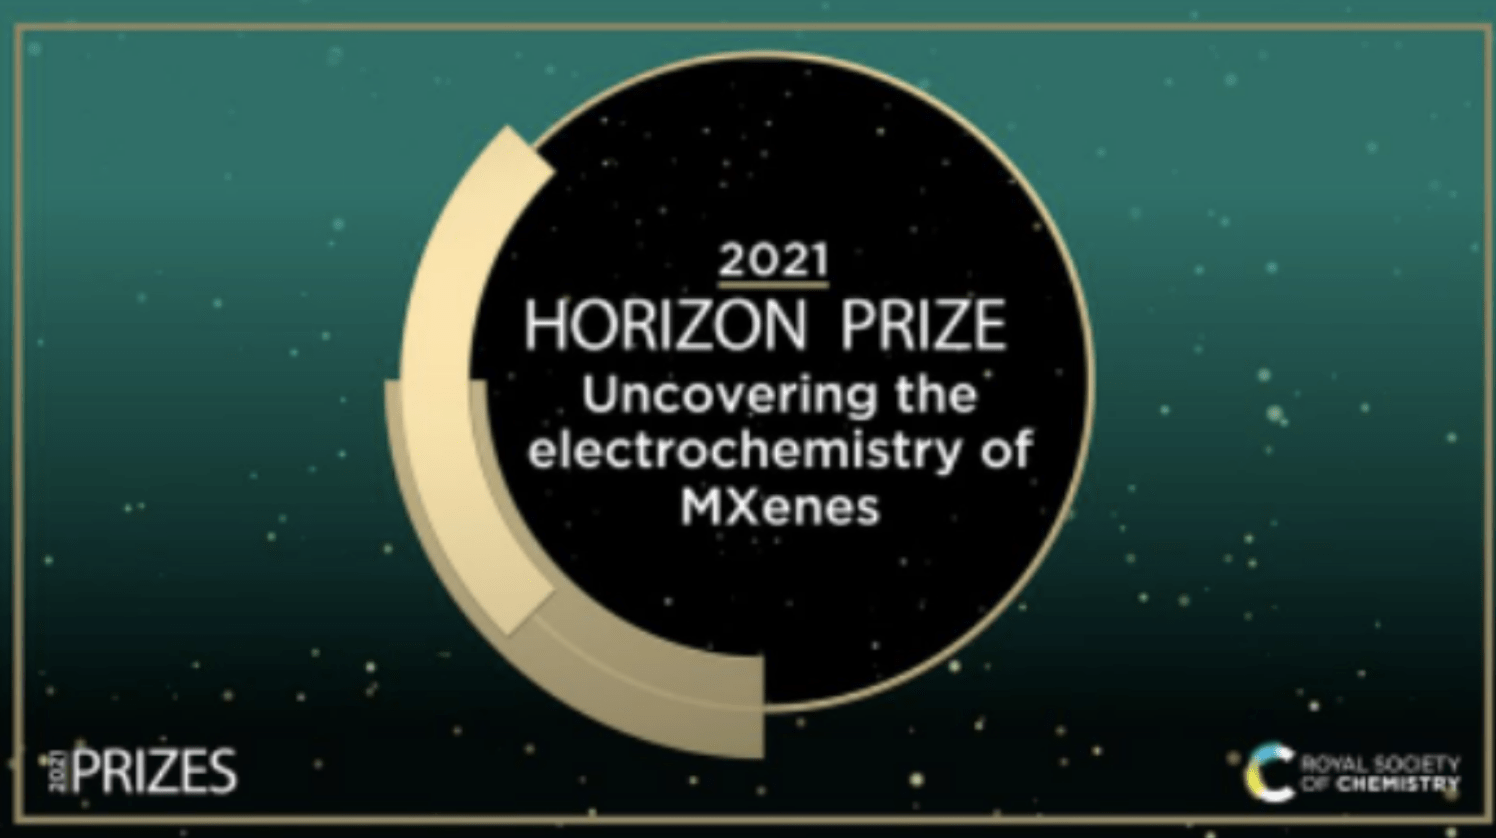 The Royal Society of Chemistry Produces Video on MXenes